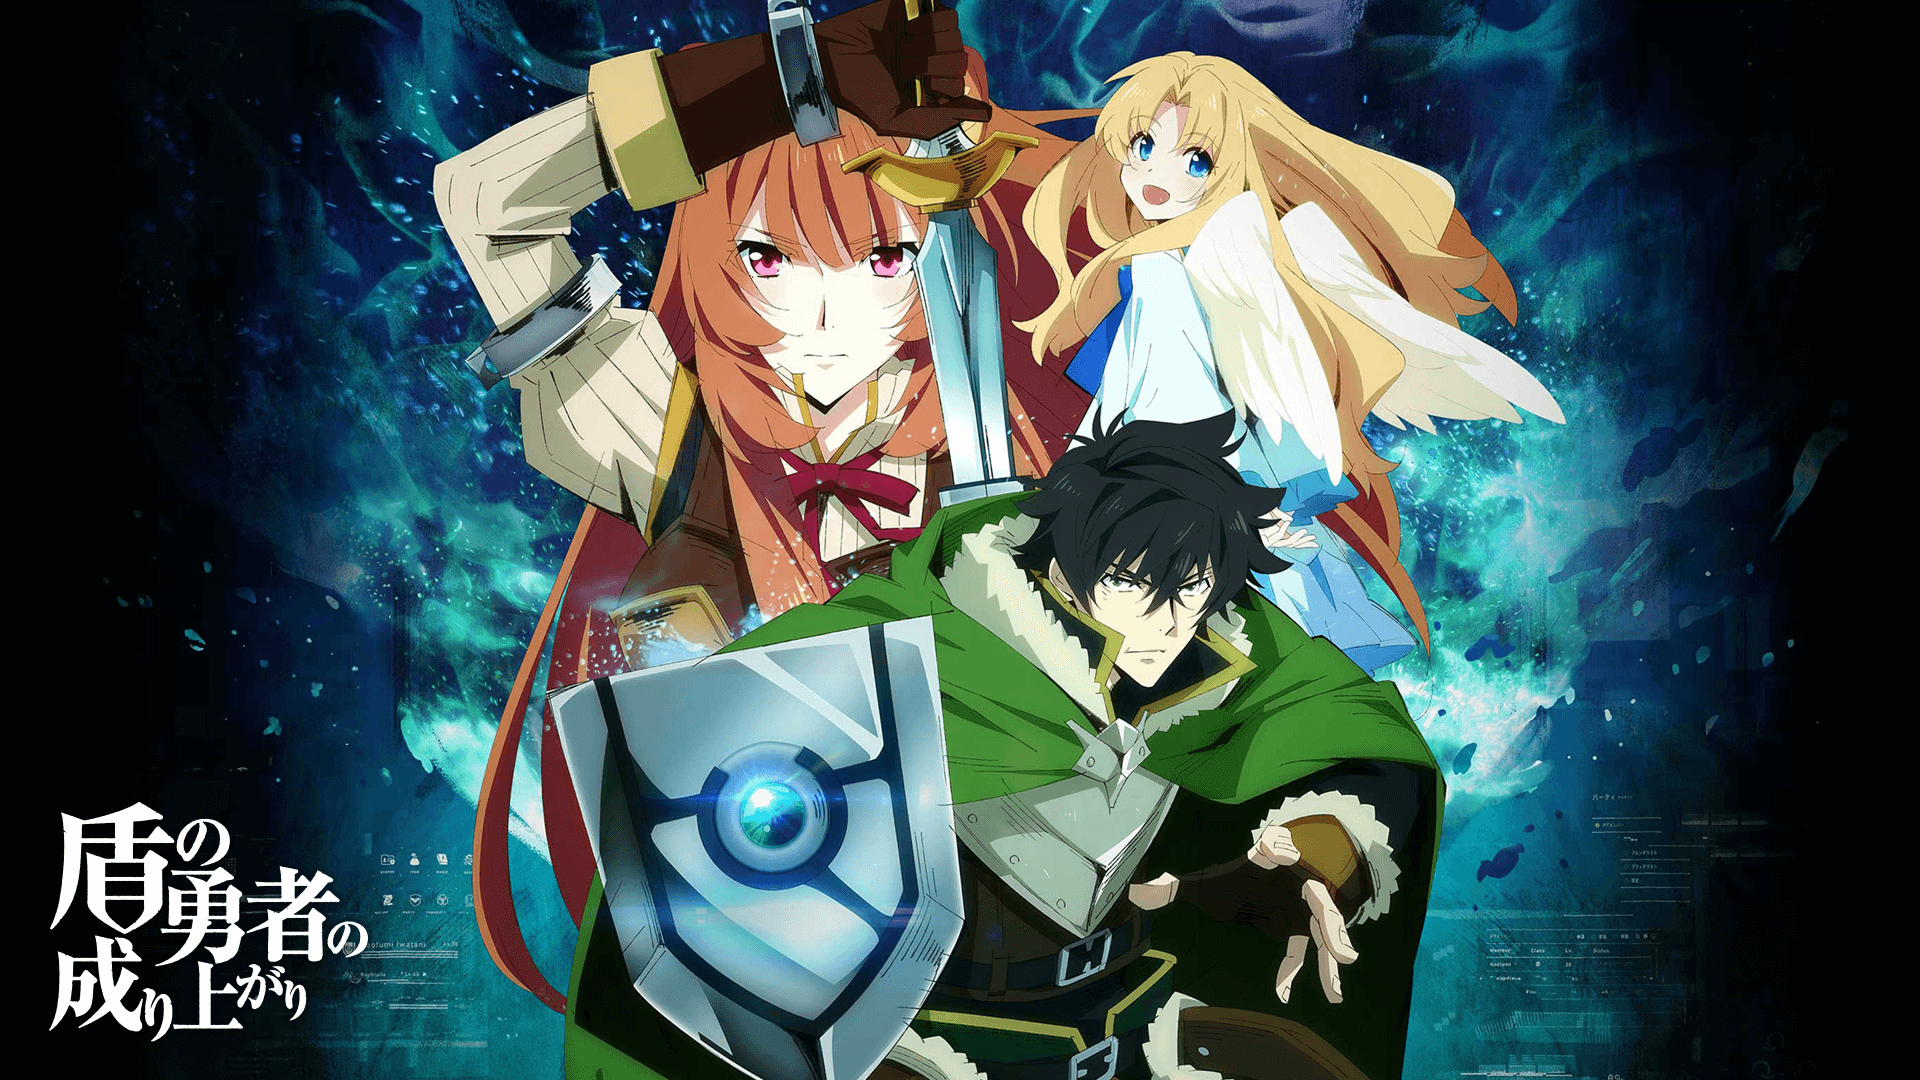 New The Rising of the Shield Hero Poster Teases Naofumis New Party   Anime Hero poster Anime wallpaper